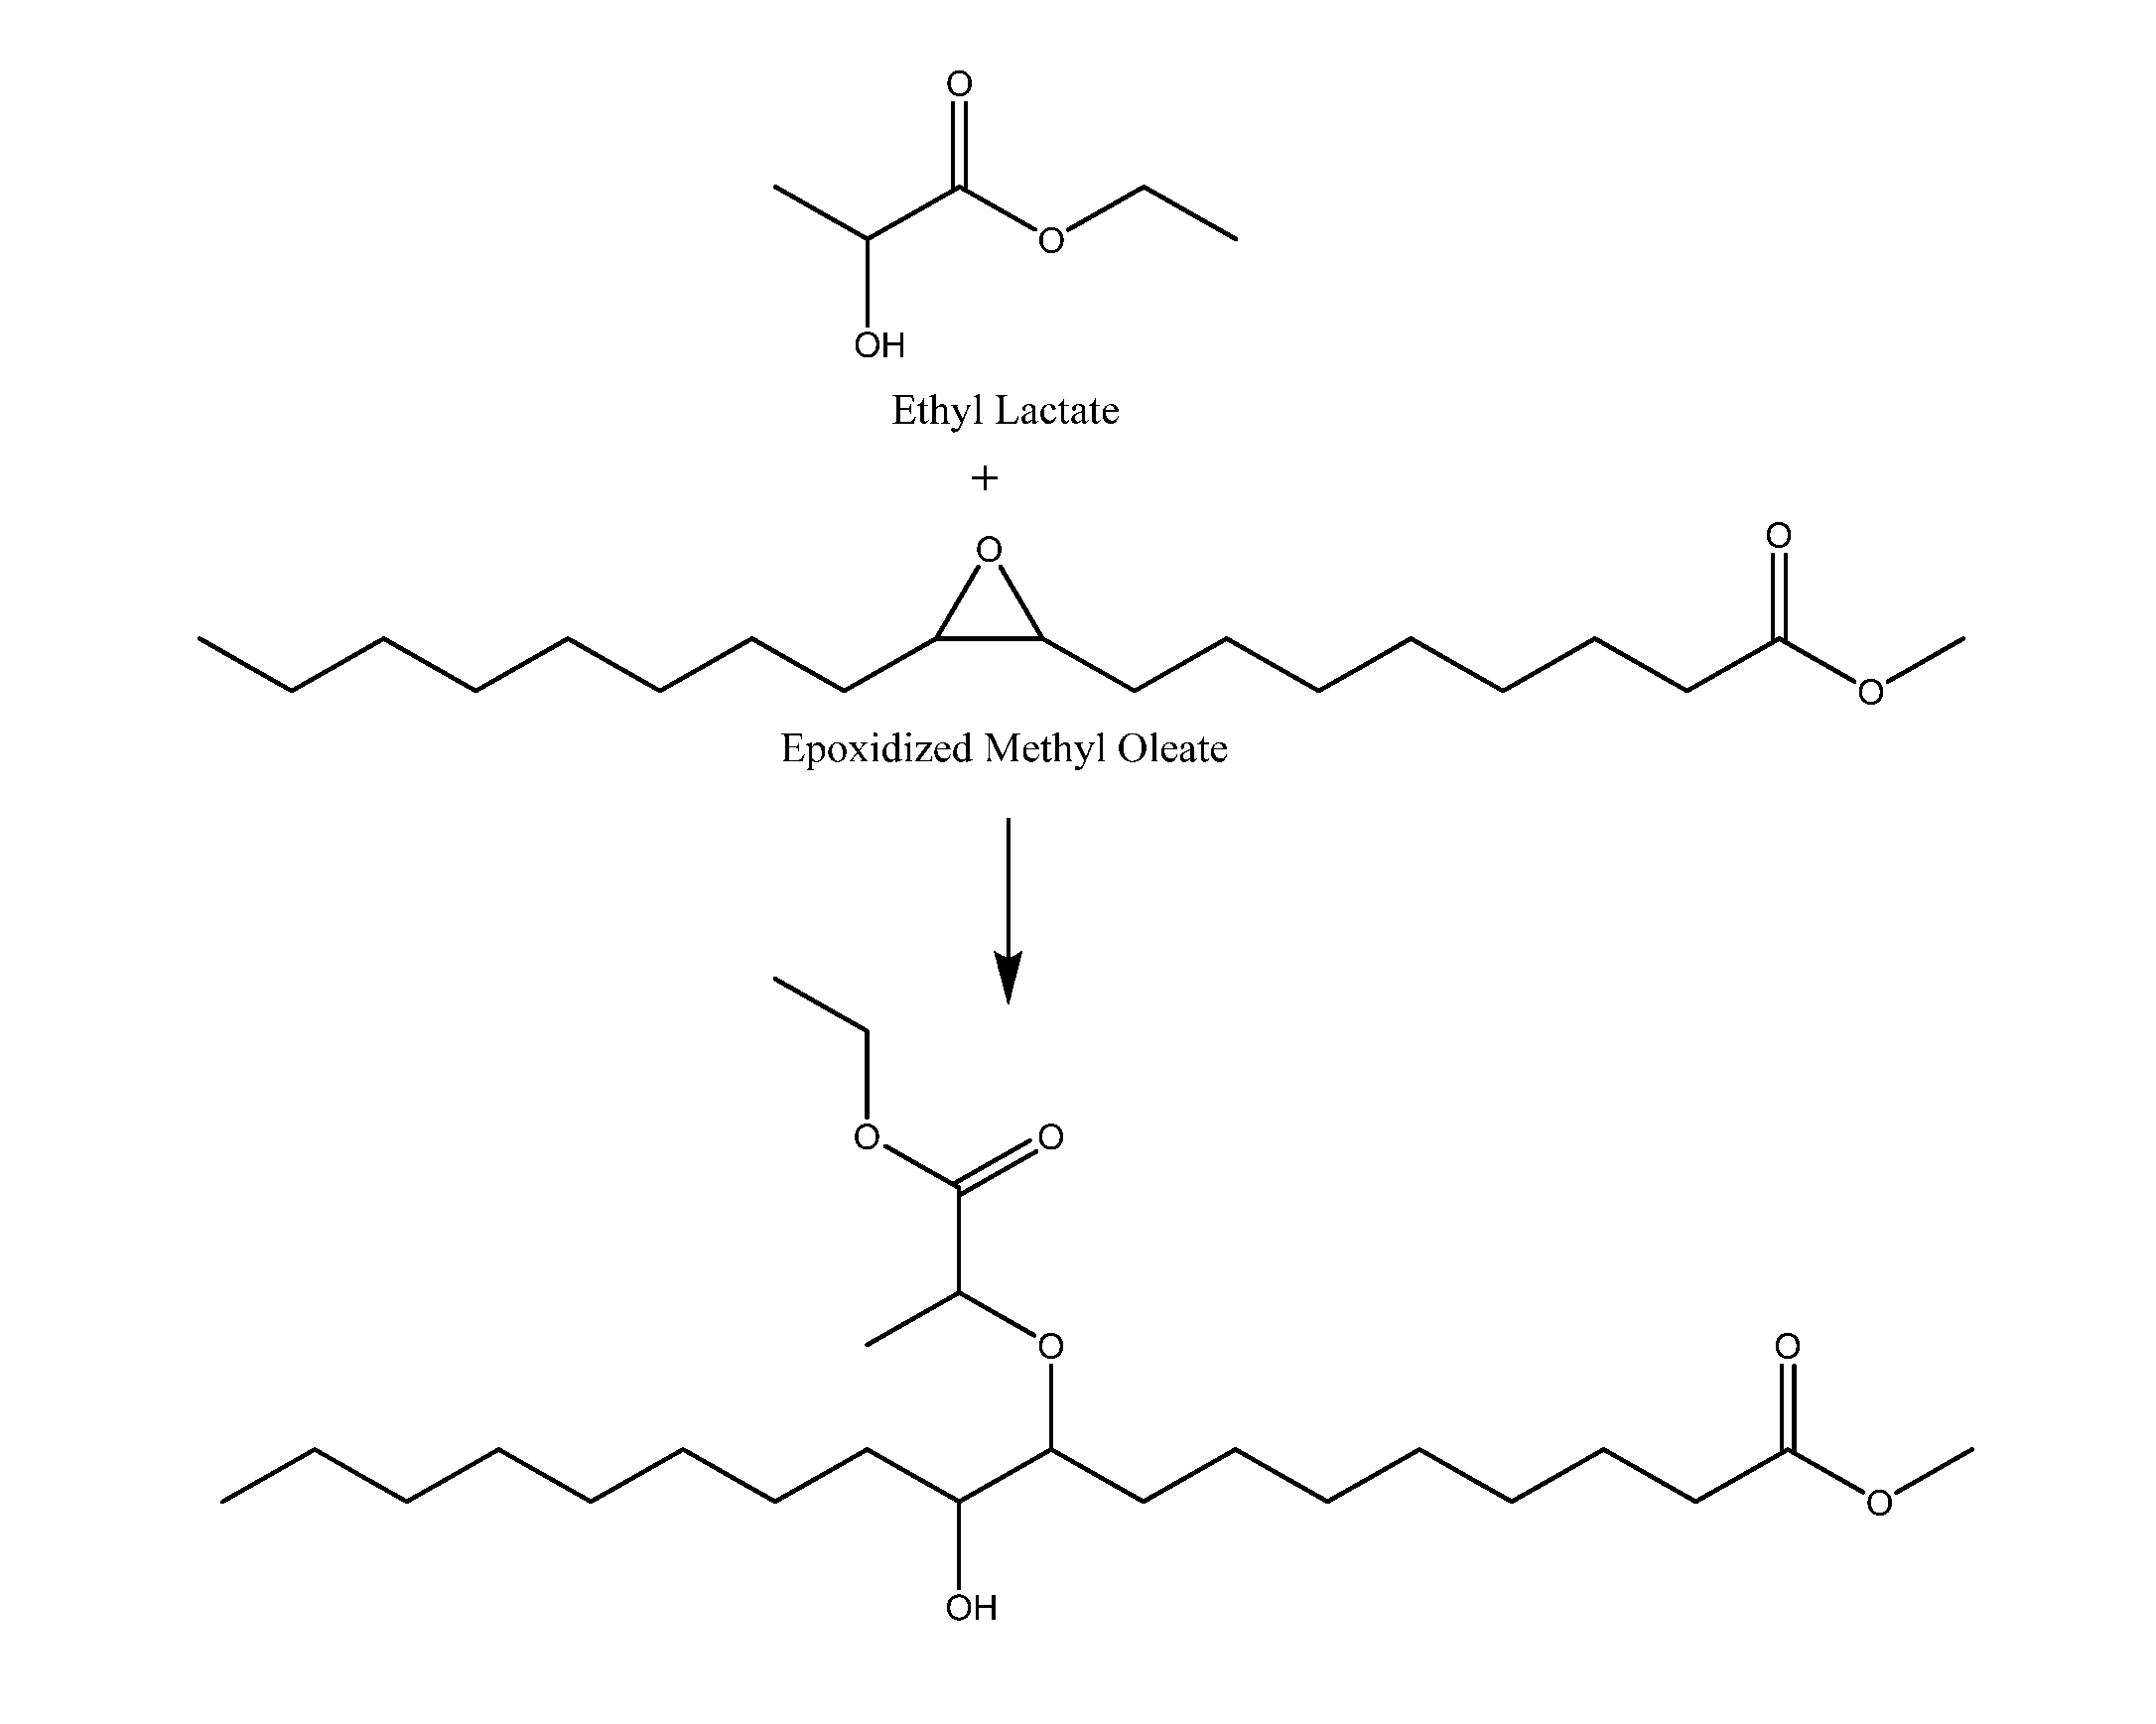 FIG 2. An example of a structure created by reacting a lactate with epoxidized oleic acid. After saponification the molecule becomes a bio-based surfactant. Source: Battelle 